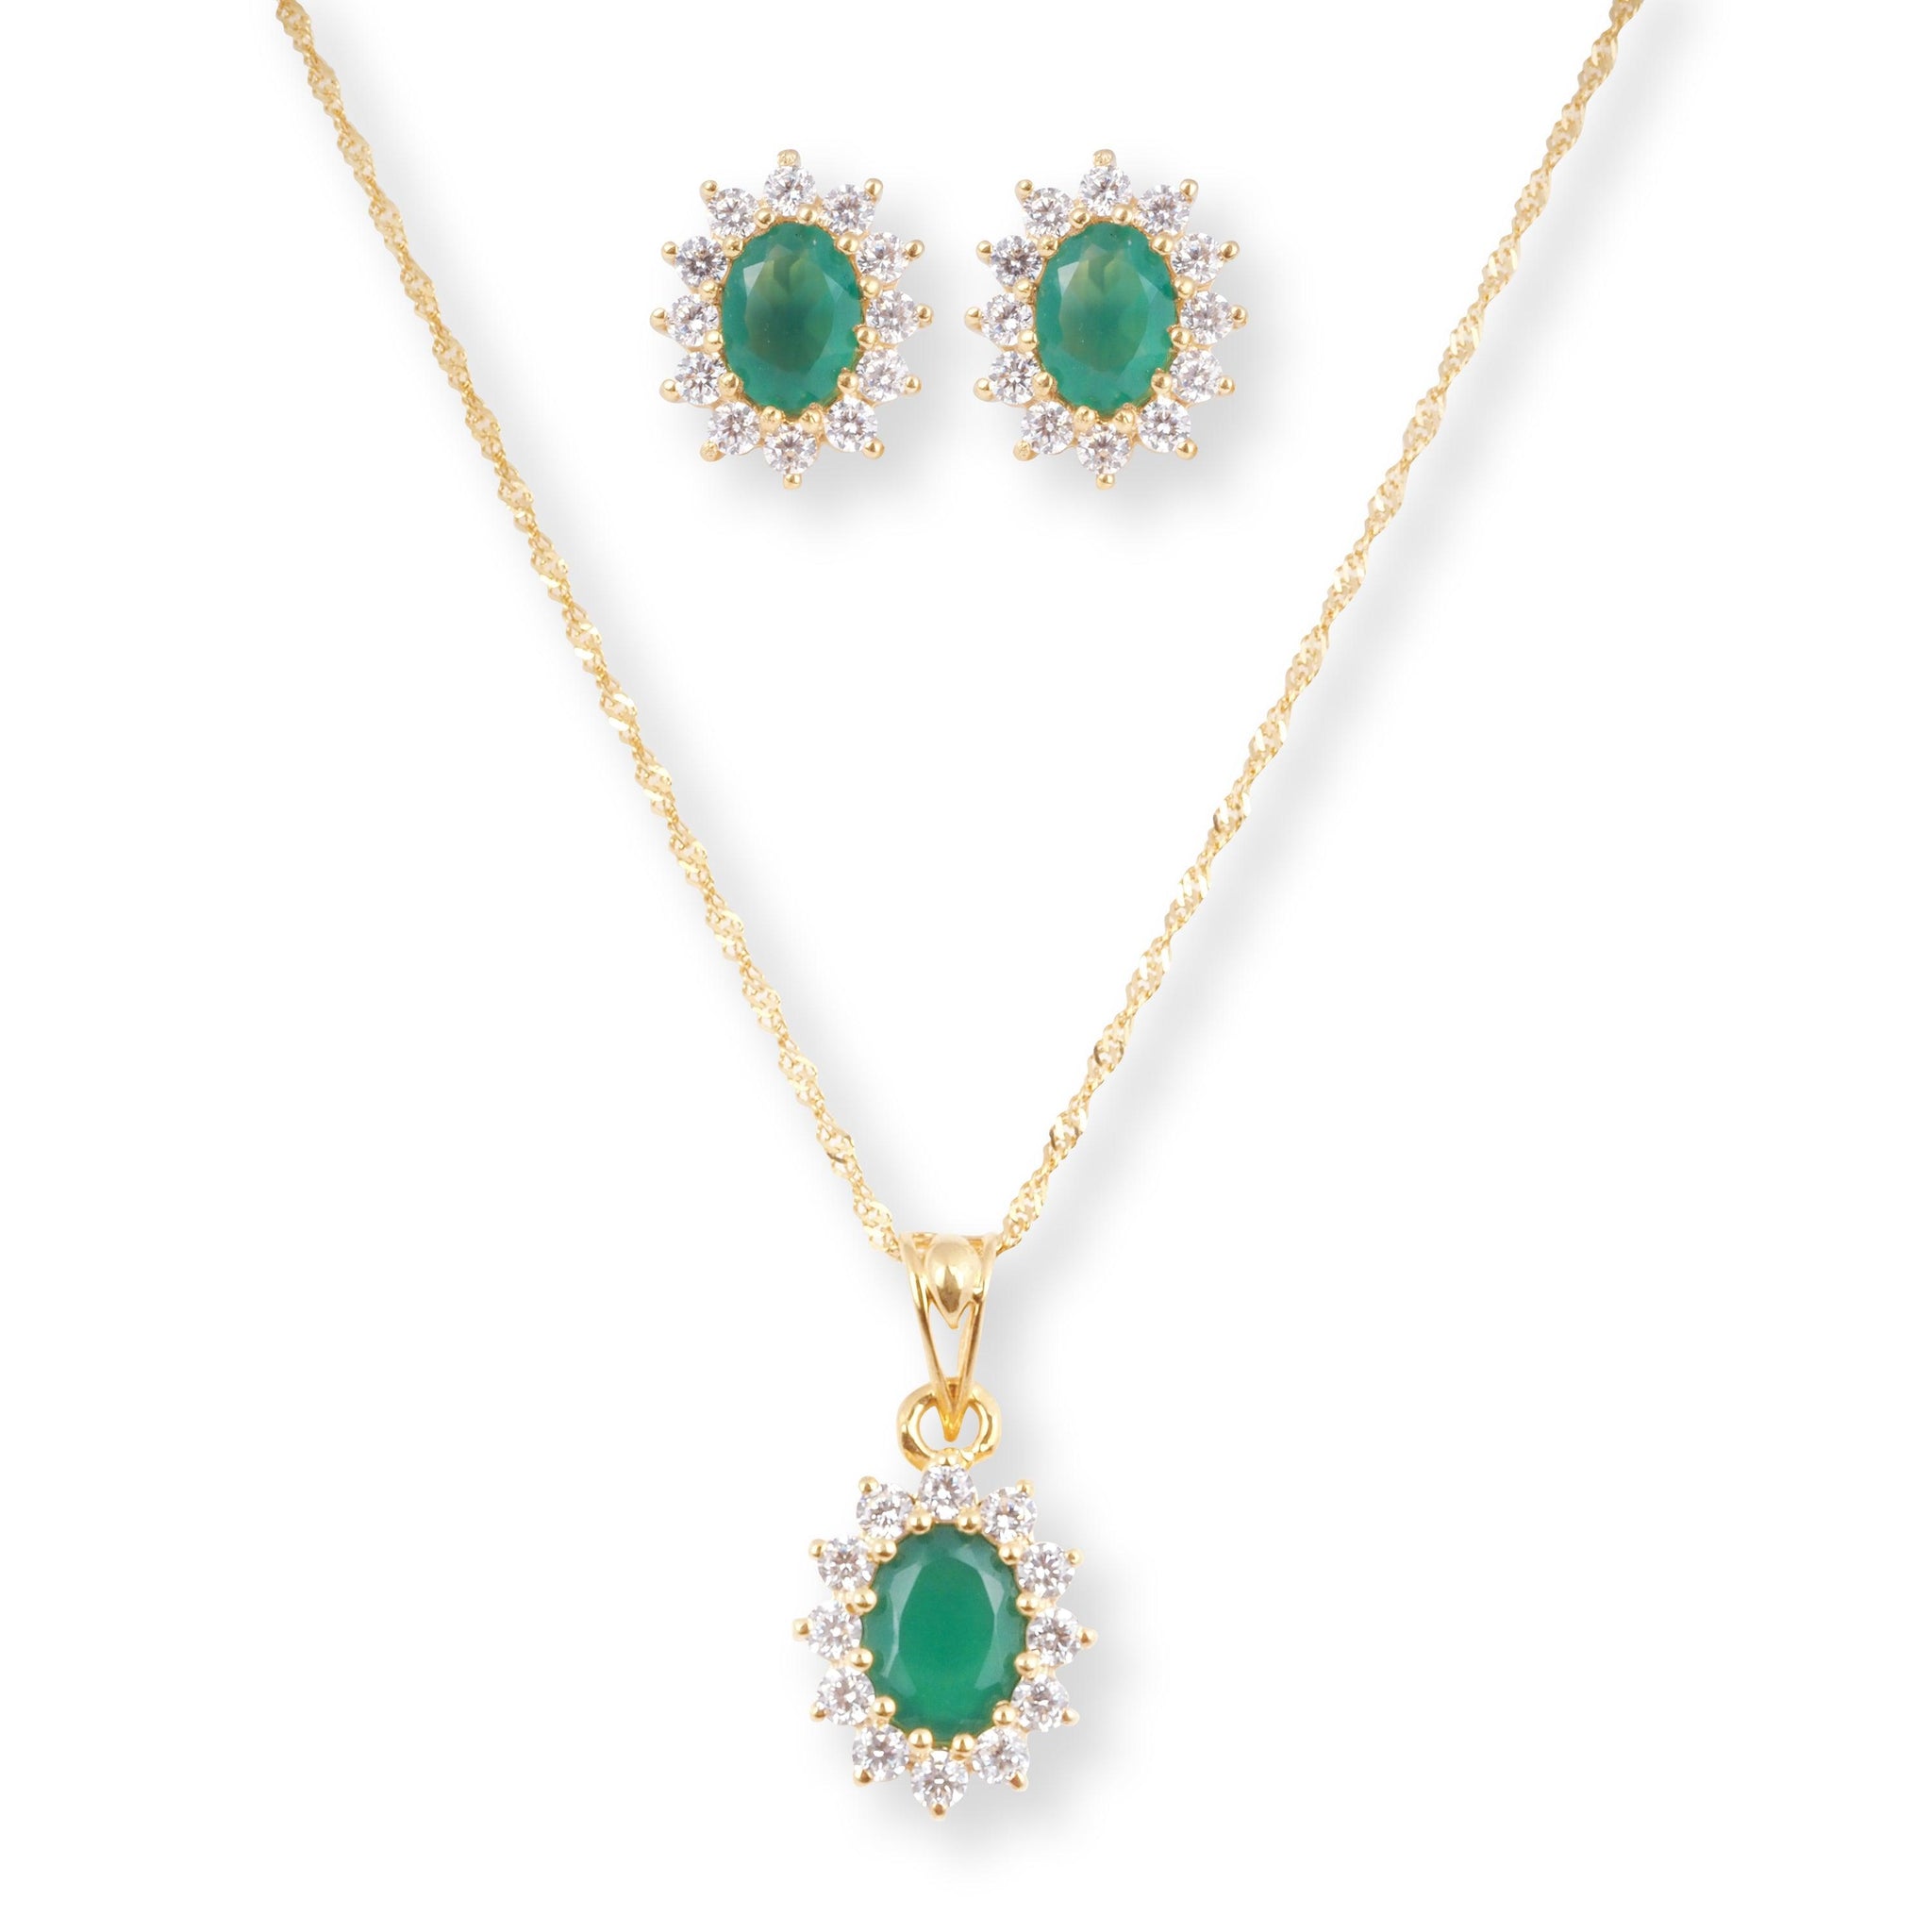 22ct Yellow Gold Pendant Set with Green Stone an Cubic Zirconia Stones.